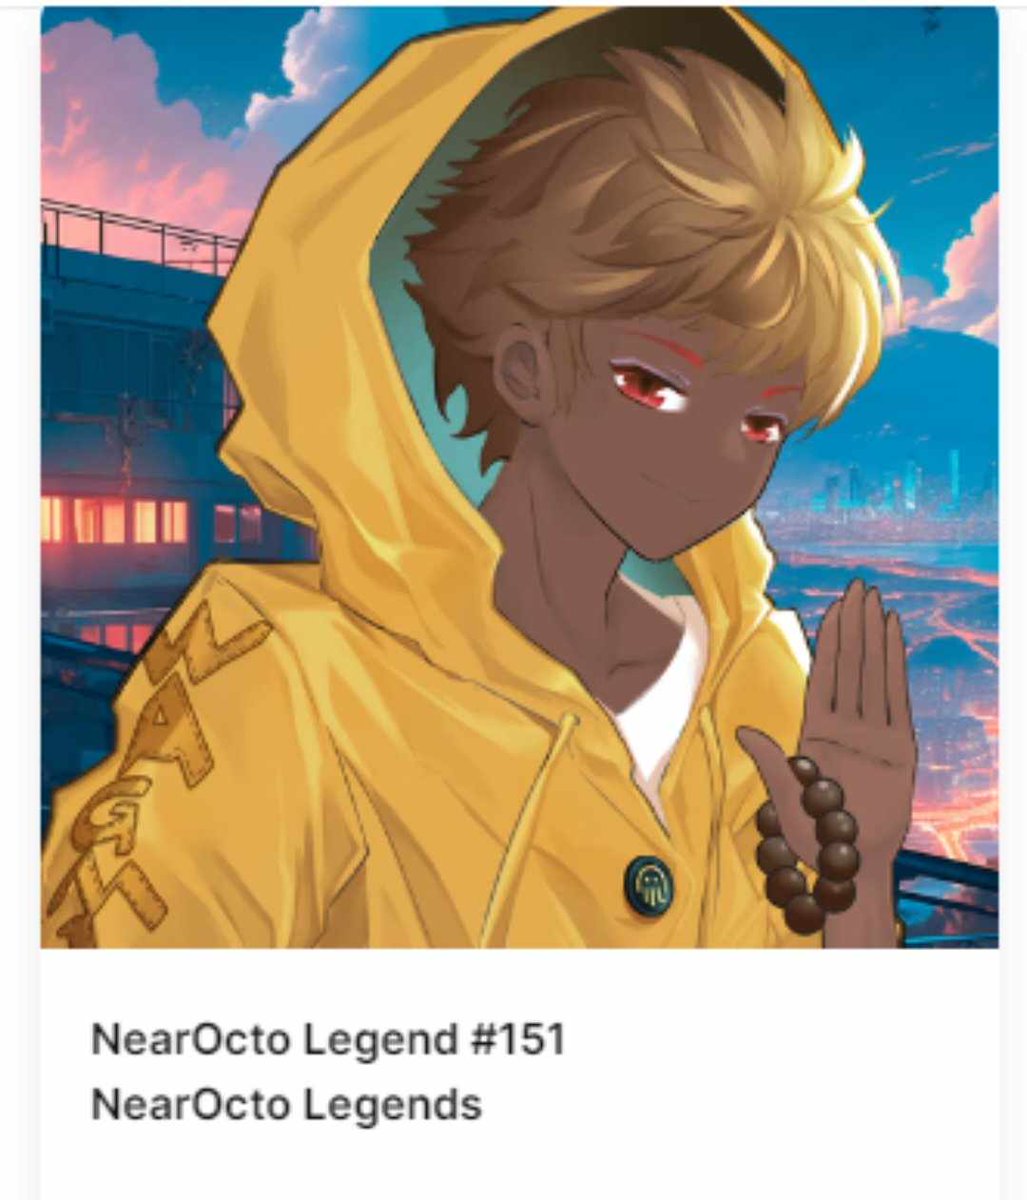 🌈 Just became the proud owner of my NearOcto Legend first NFT! 🖼️💎 Thrilled to support and collect digital art in the blockchain world. Here is the link where you can Mint: nearoctolegends.com

 #NFTCollector #NearOctoLegend #CryptoMagic #NFTJourney